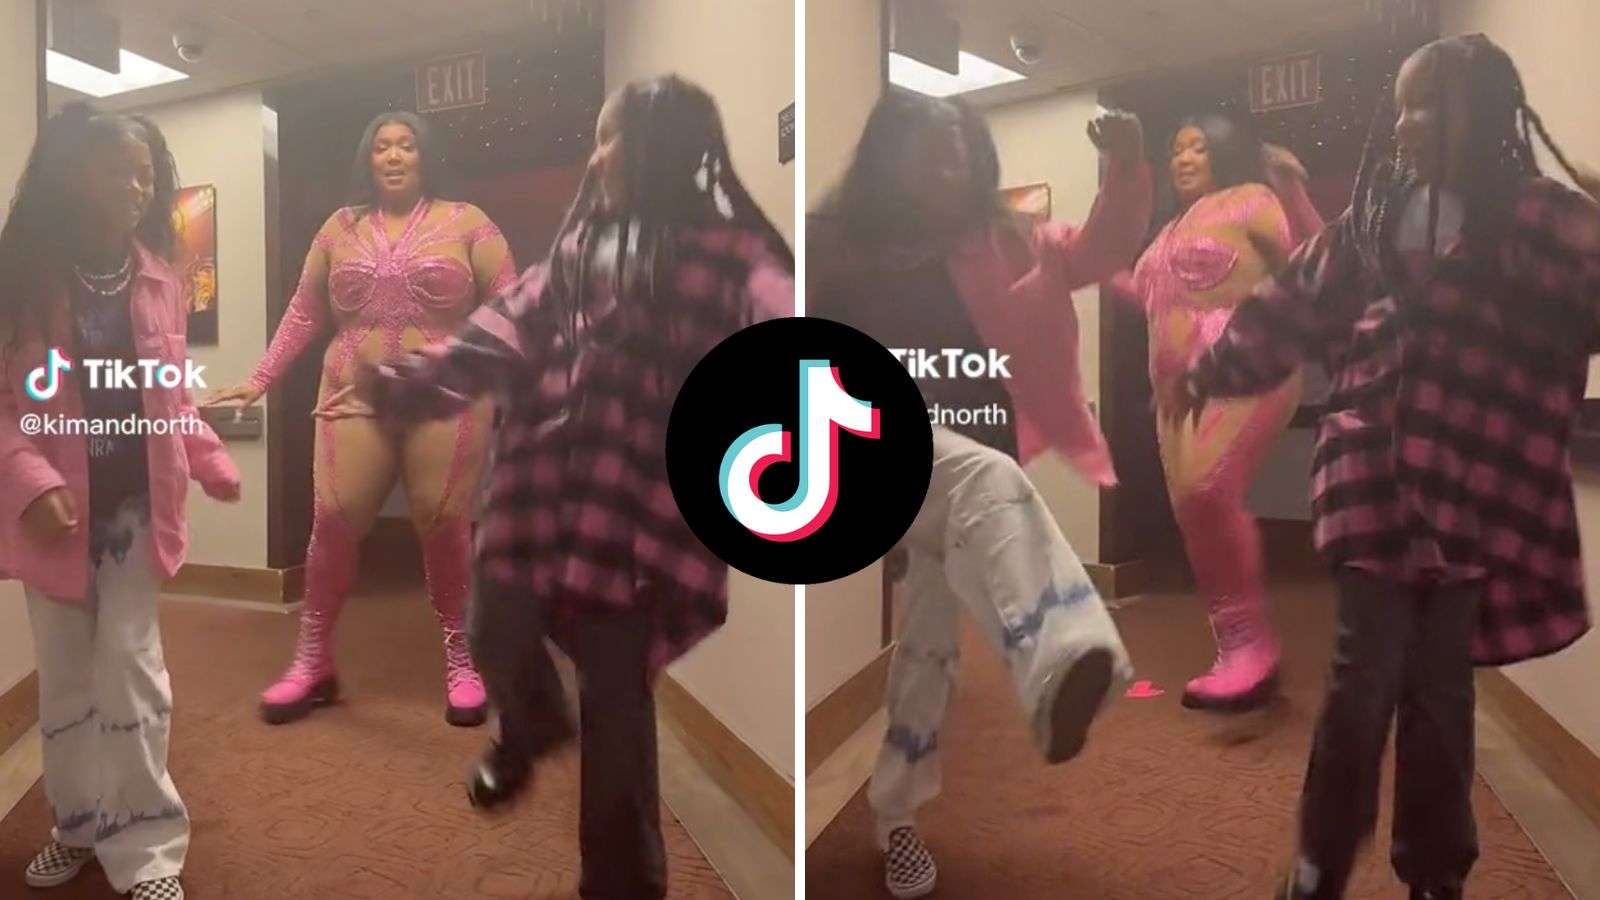 Lizzo joins North West for viral ‘Get Sturdy’ TikTok dance